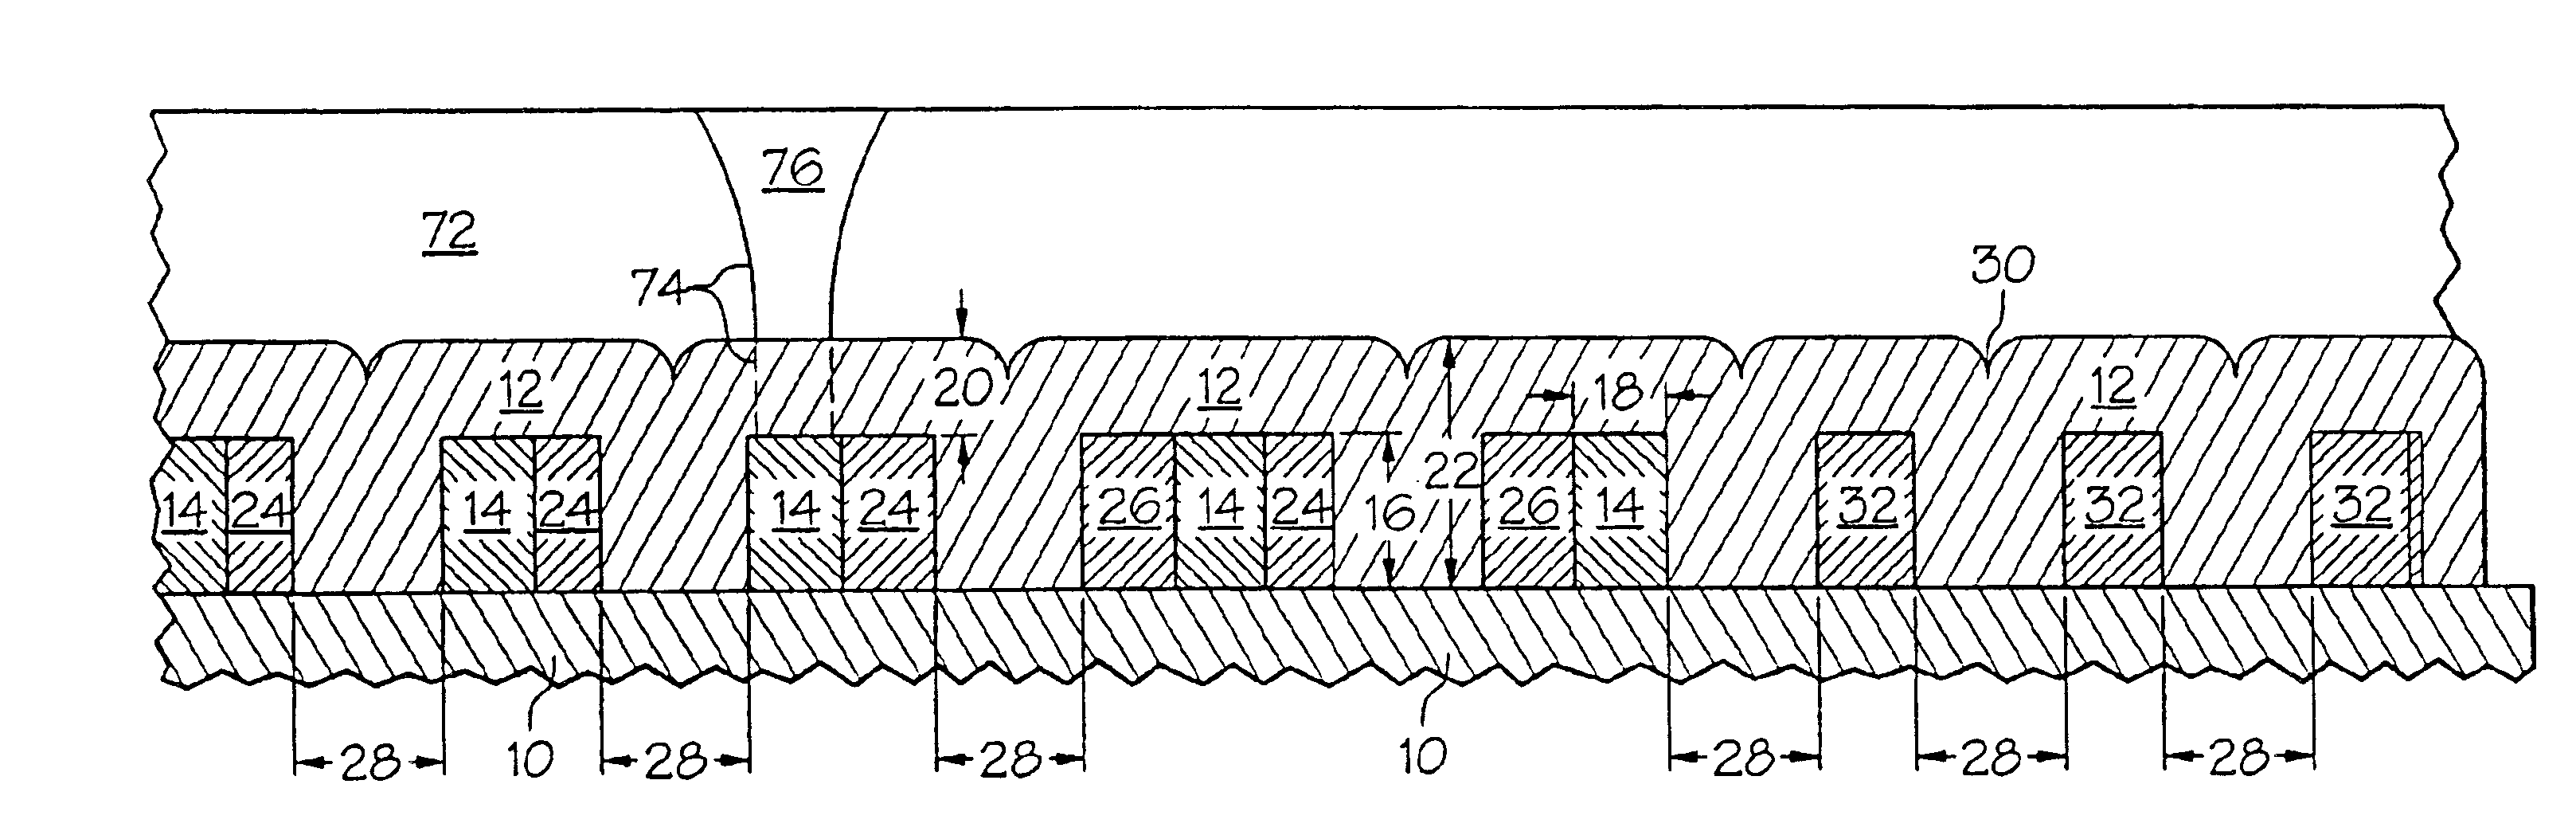 Metal line layout of an integrated circuit